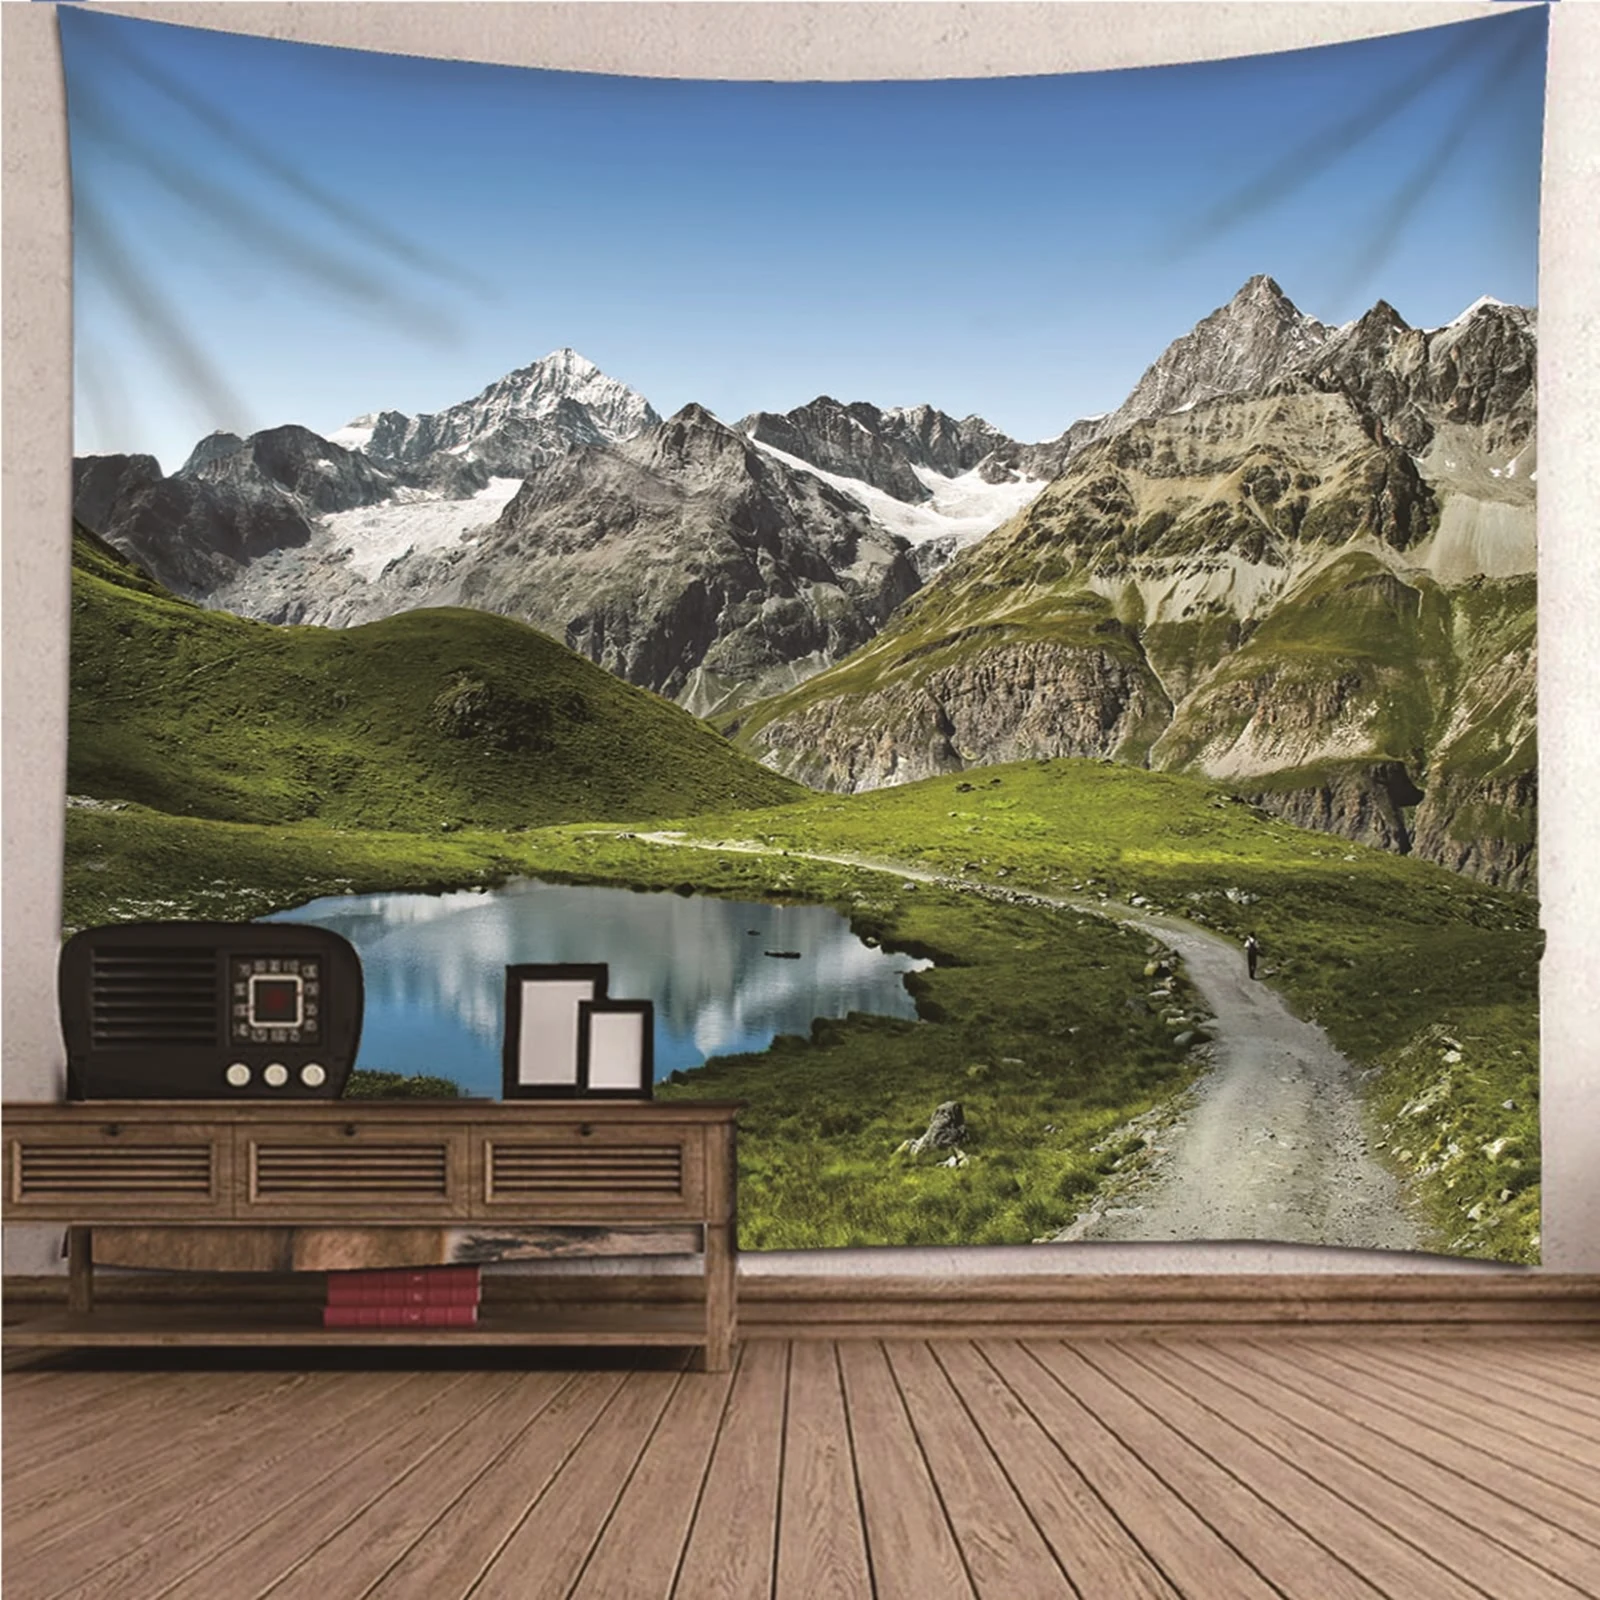 

Tapestries Large Tapestry Art Small Natural Scenery Dorm Art Wall Decor Covering Carpets Bedspread Beach Mat